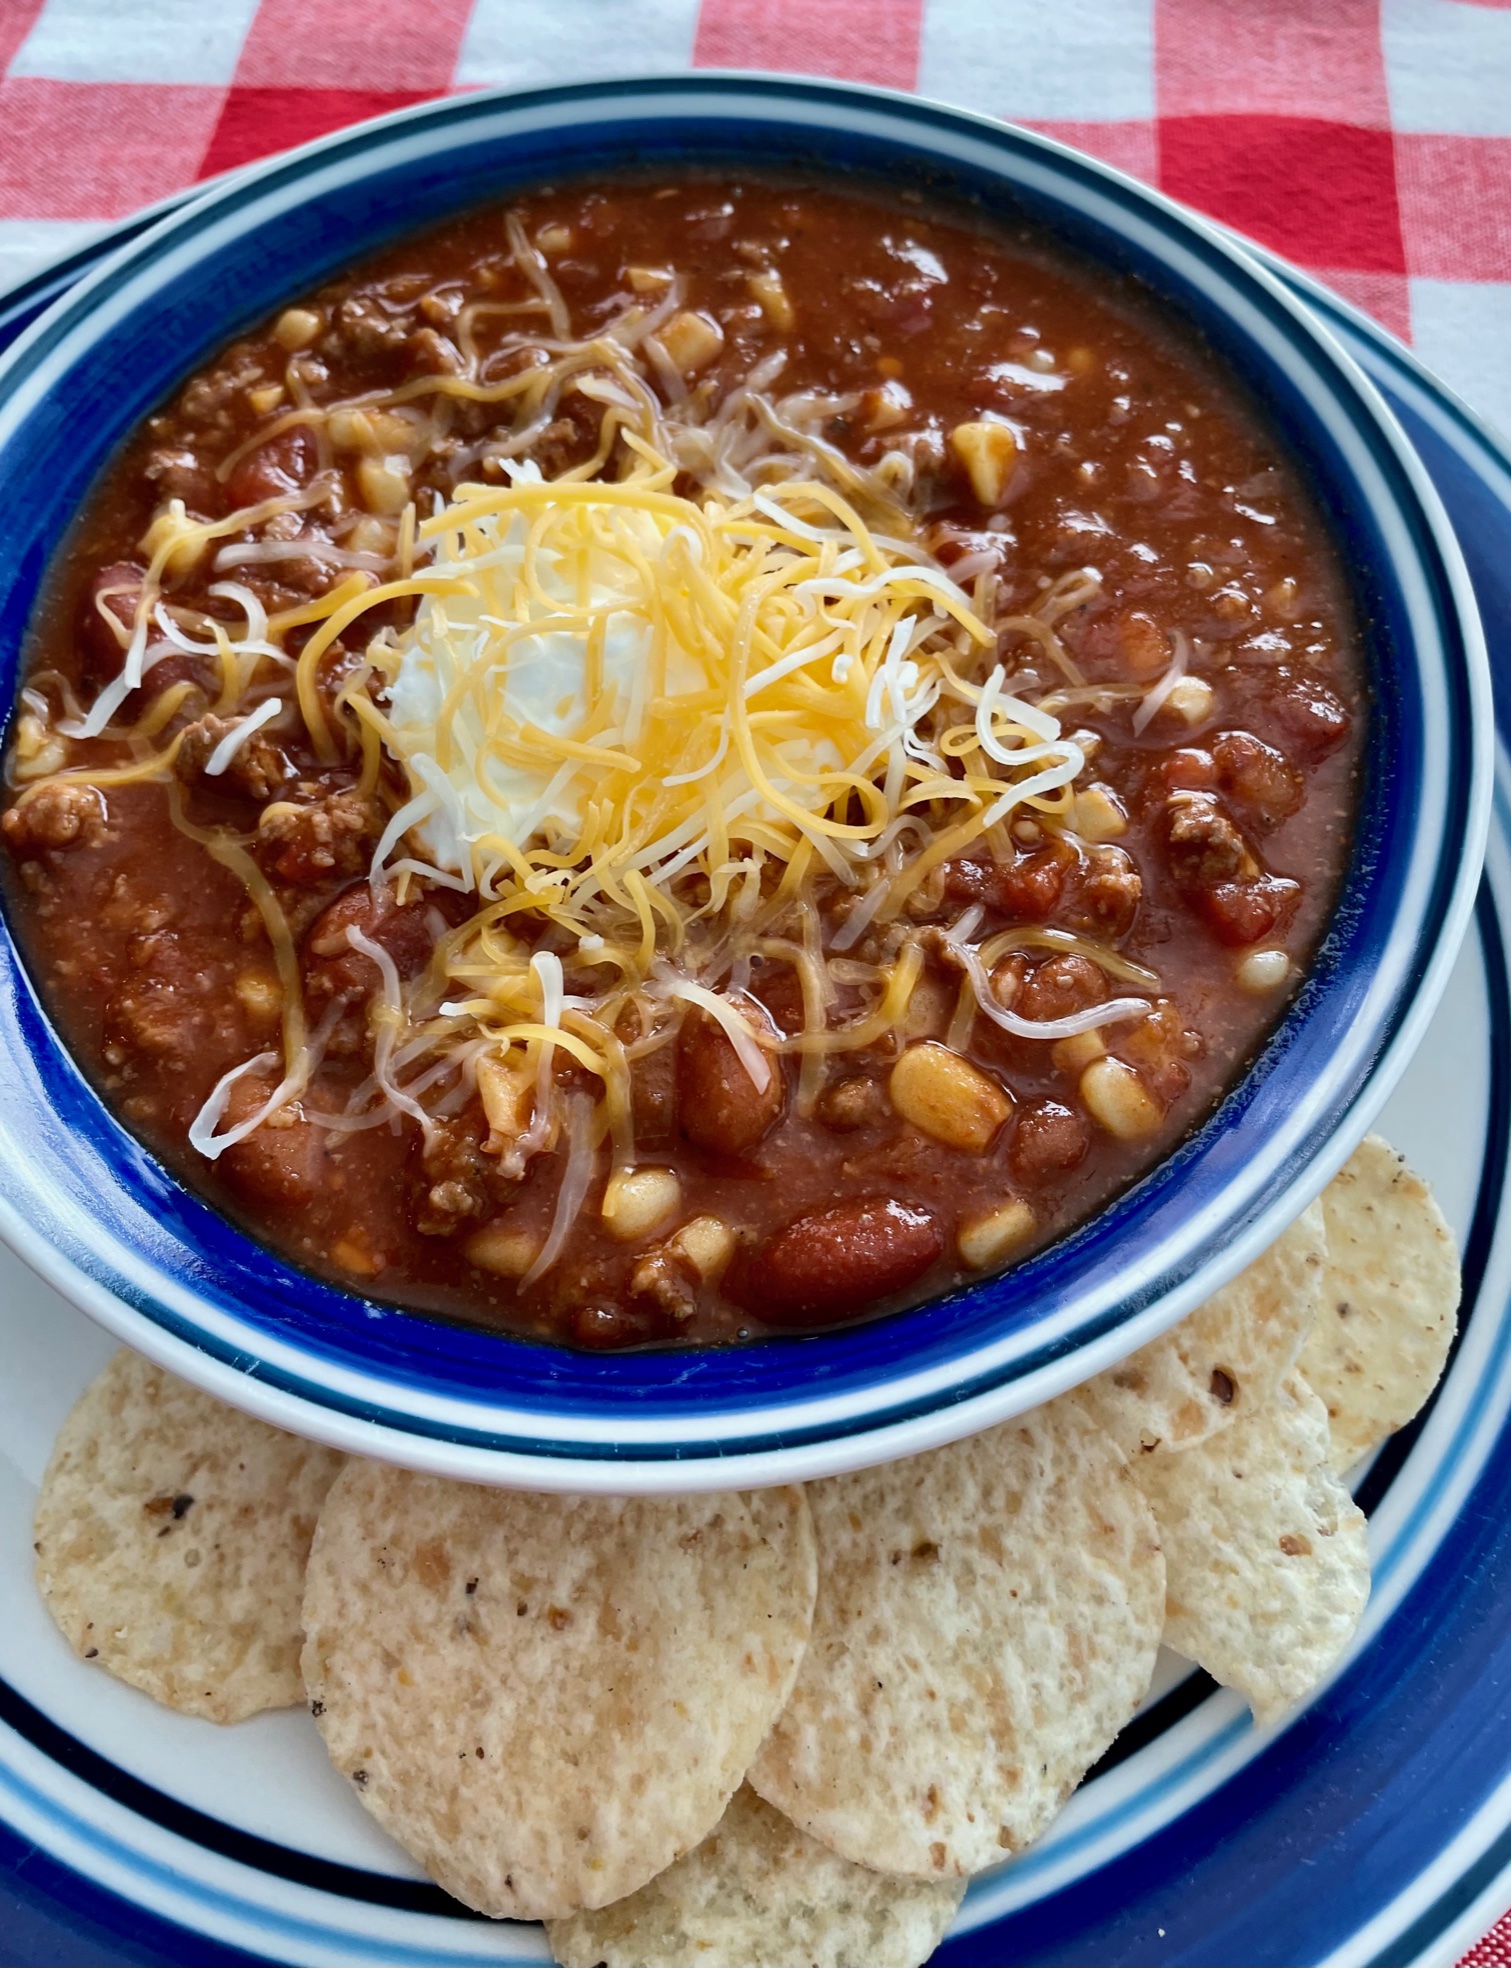 Santa Fe Soup:  You Want This Flavorful Tex-Mex Recipe!